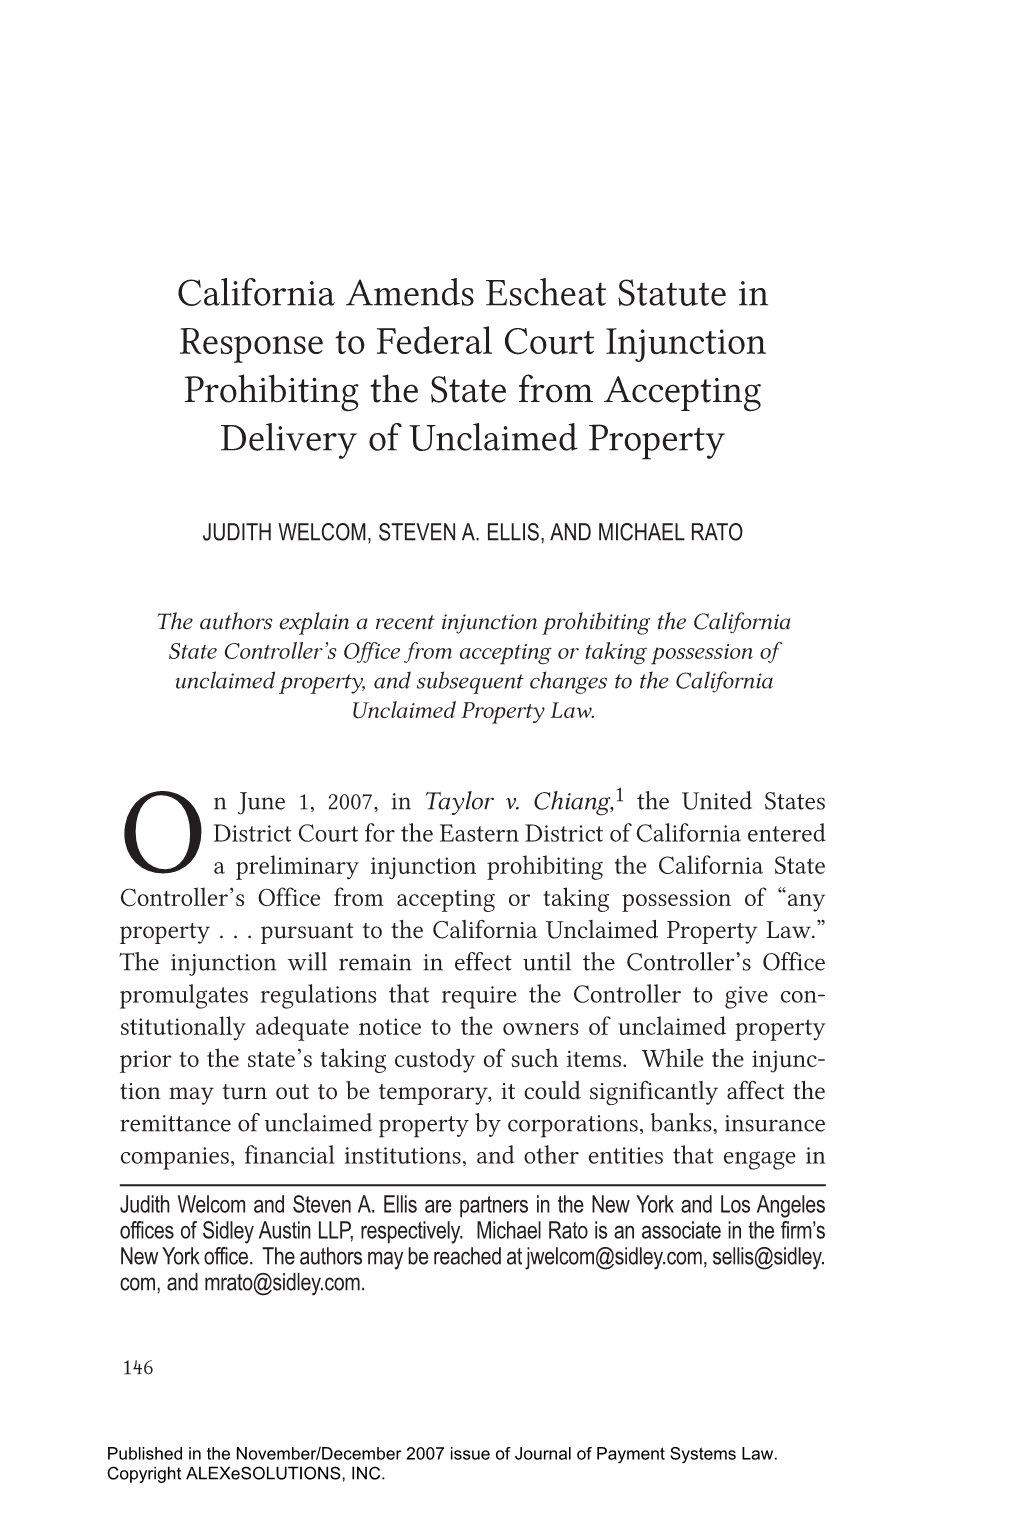 California Amends Escheat Statute in Response to Federal Court Injunction Prohibiting the State from Accepting Delivery of Unclaimed Property